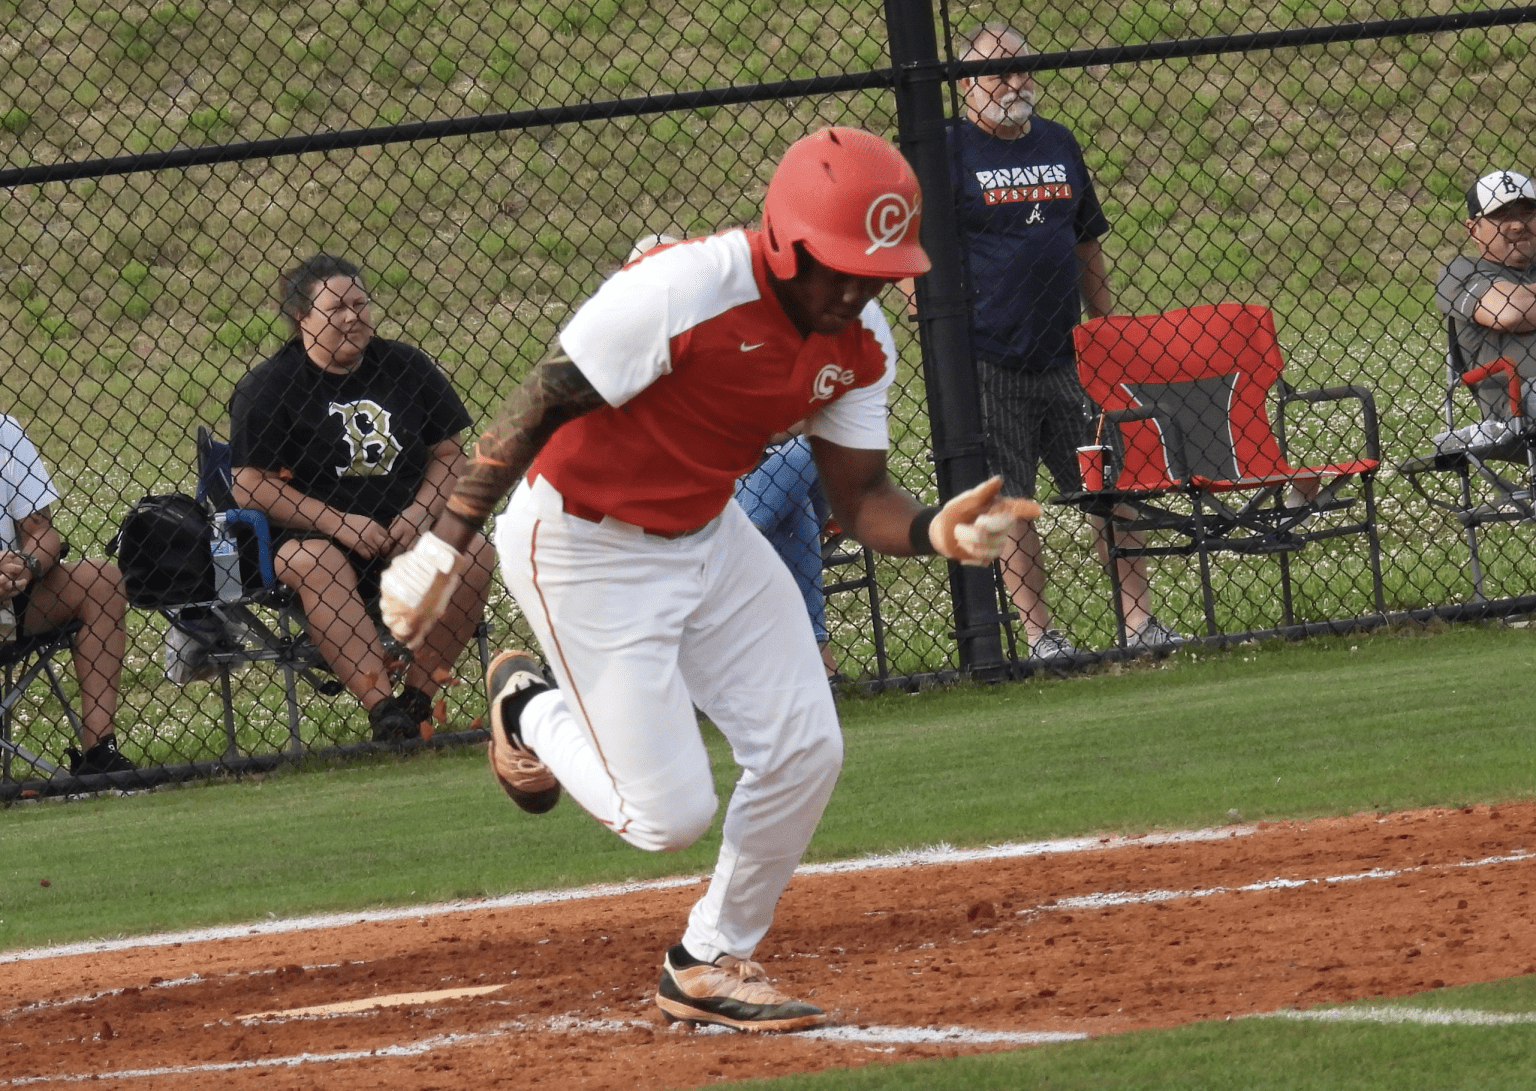 Two from County Selected for NorthSouth Baseball Games Who's On The Move